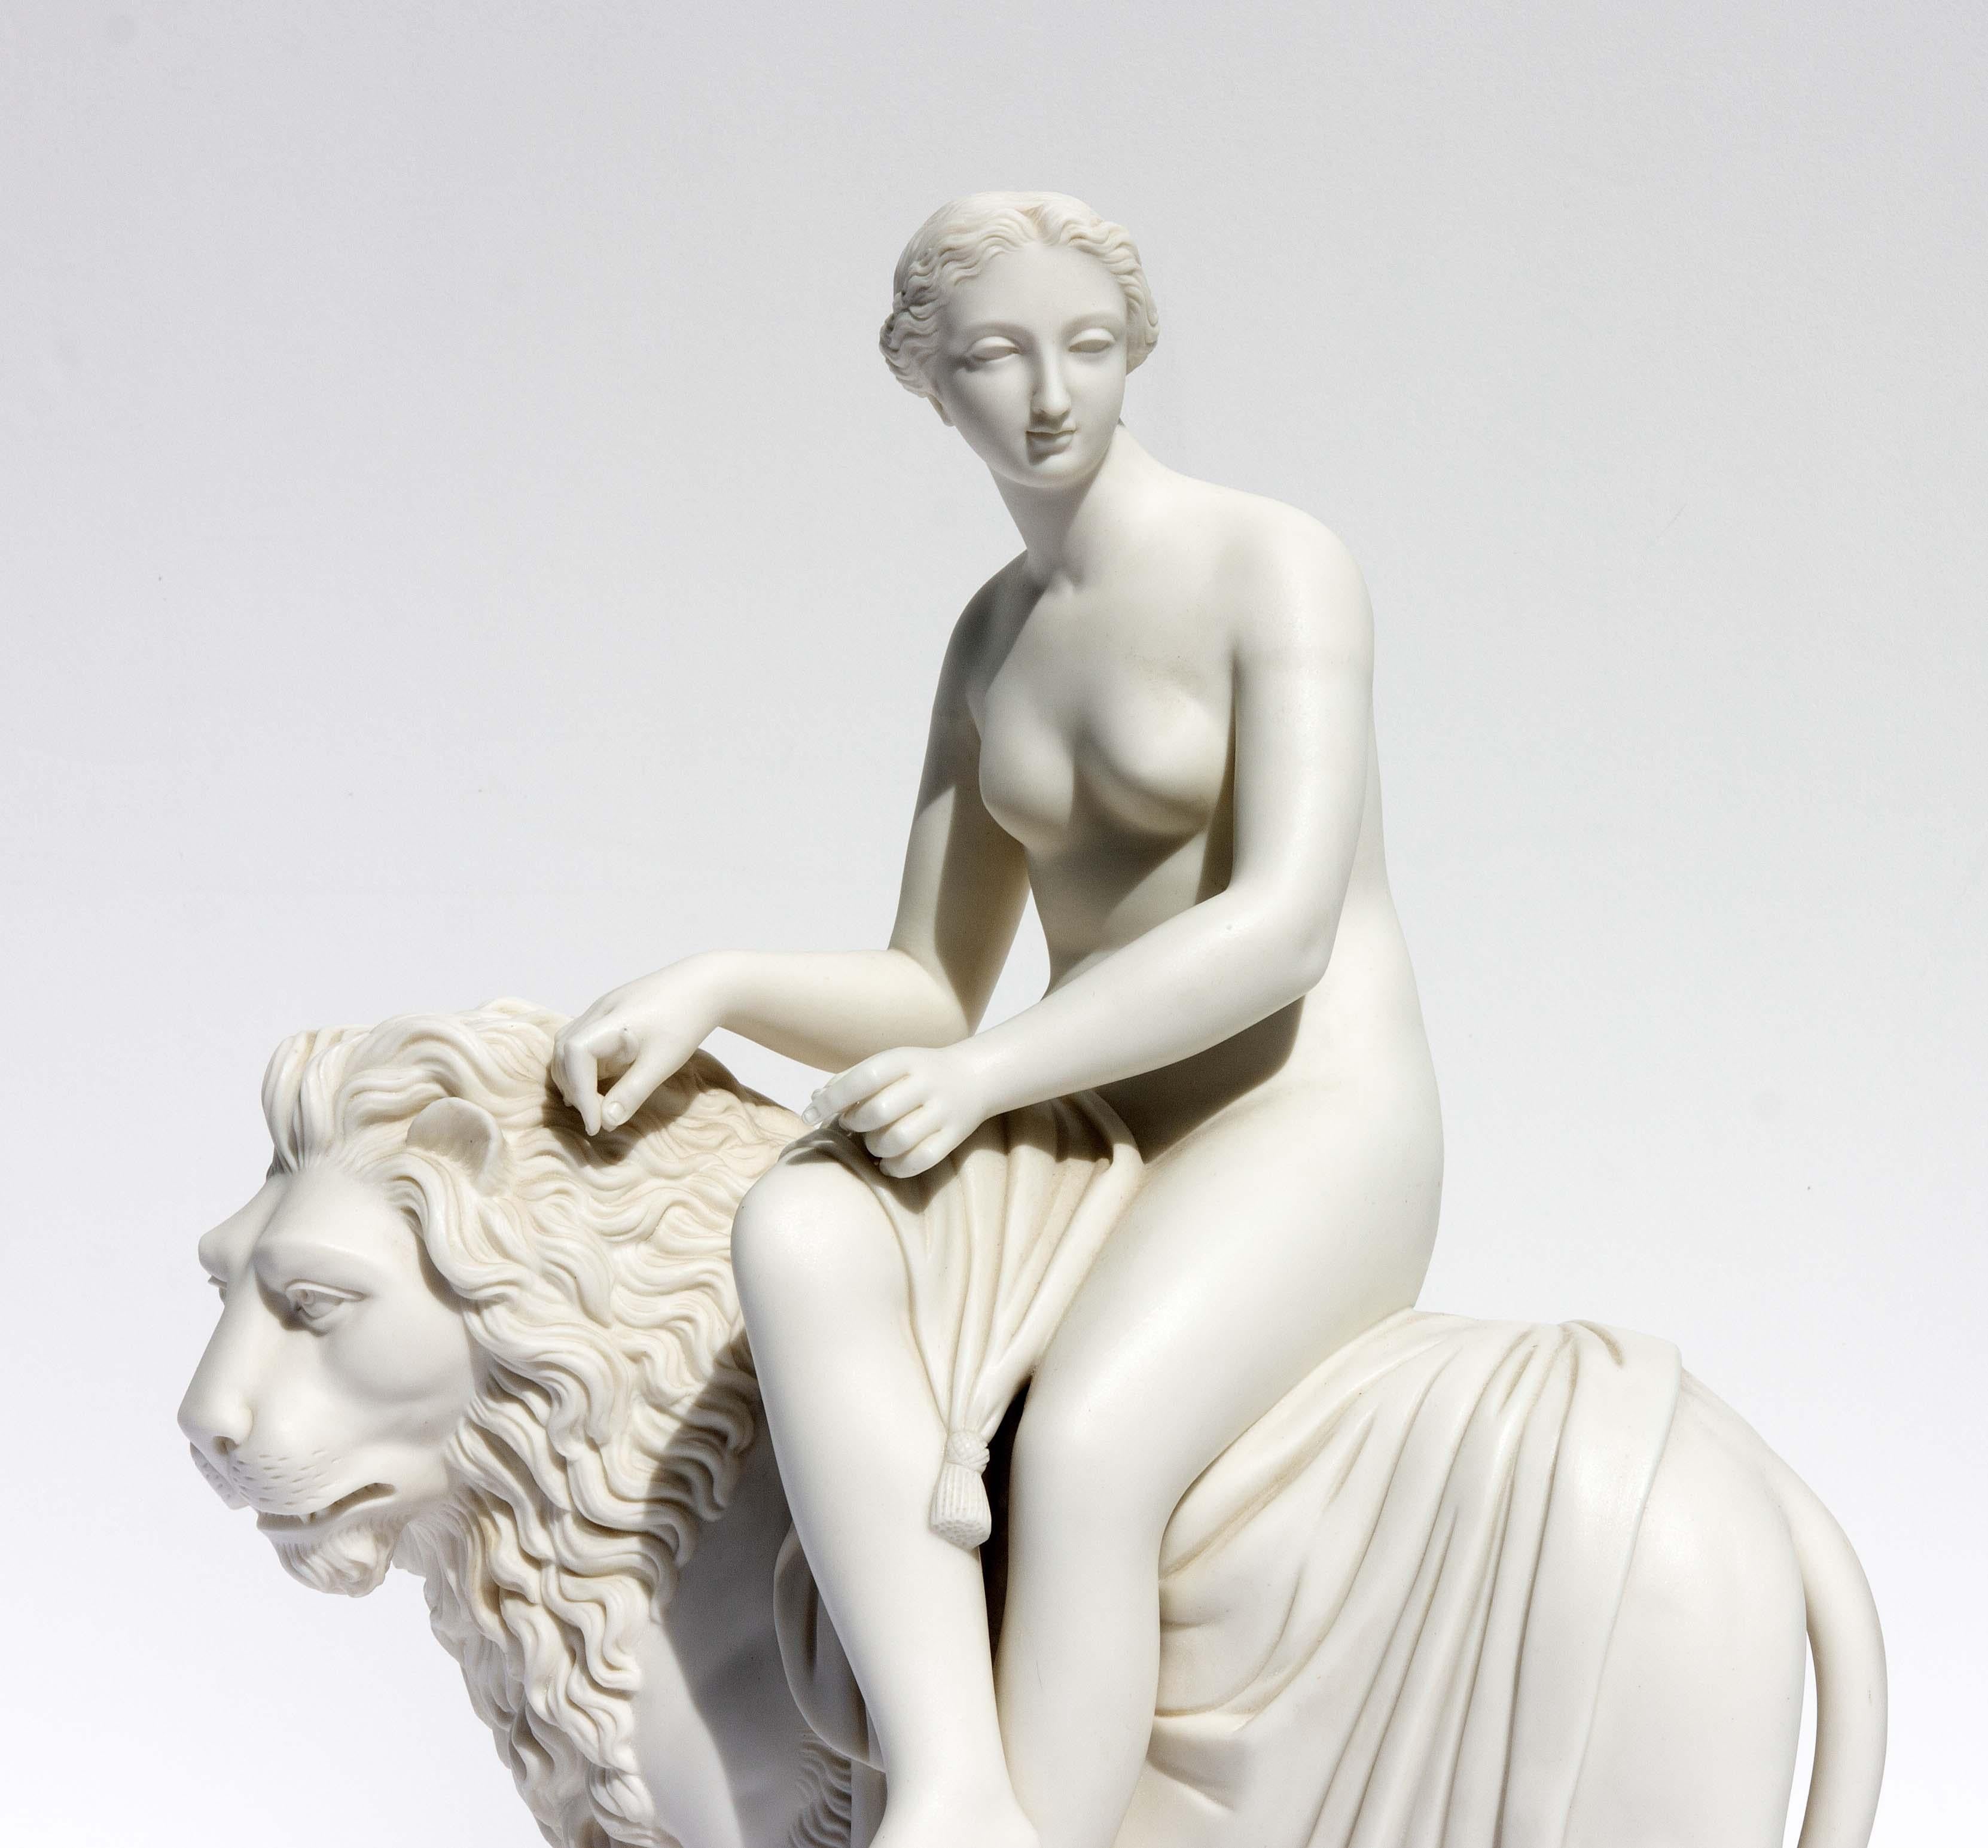 Antique parian sculpture of Una and the Lion. Great detail. English. Mid-19th century.
Presented by Joseph Dasta Antiques.